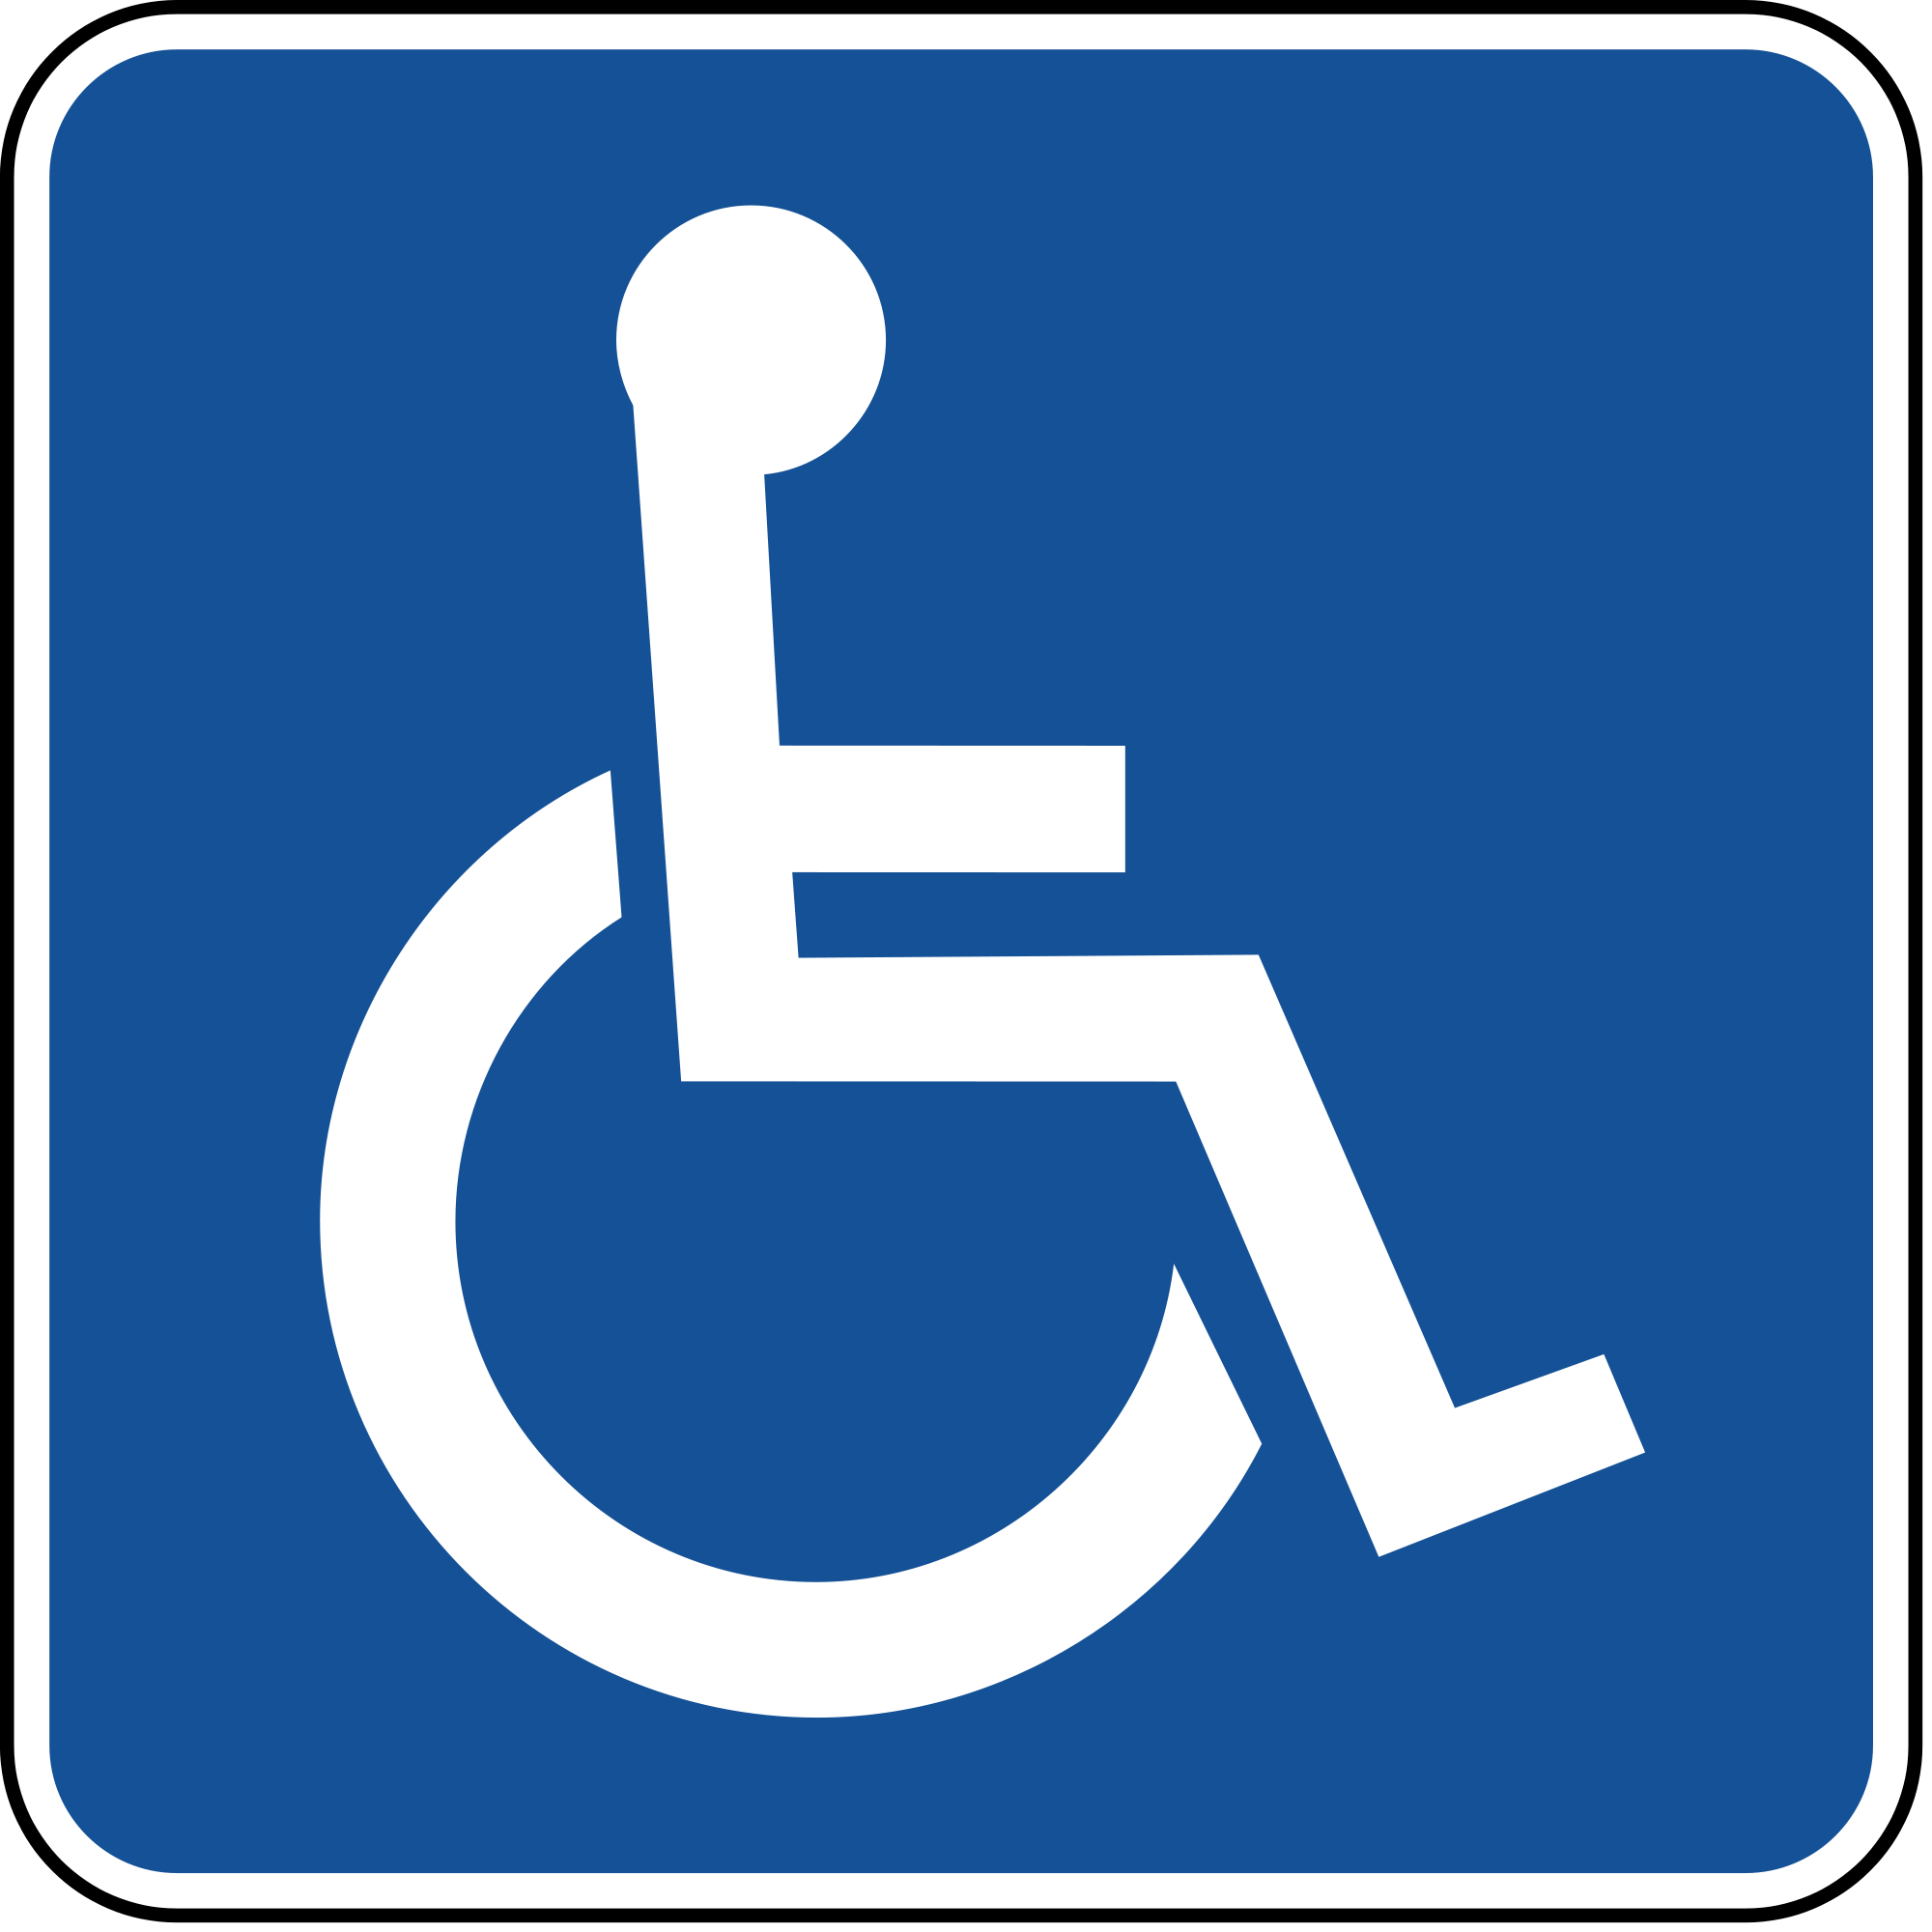 Airport accessibility information and Americans with Disabilities Act coordinator